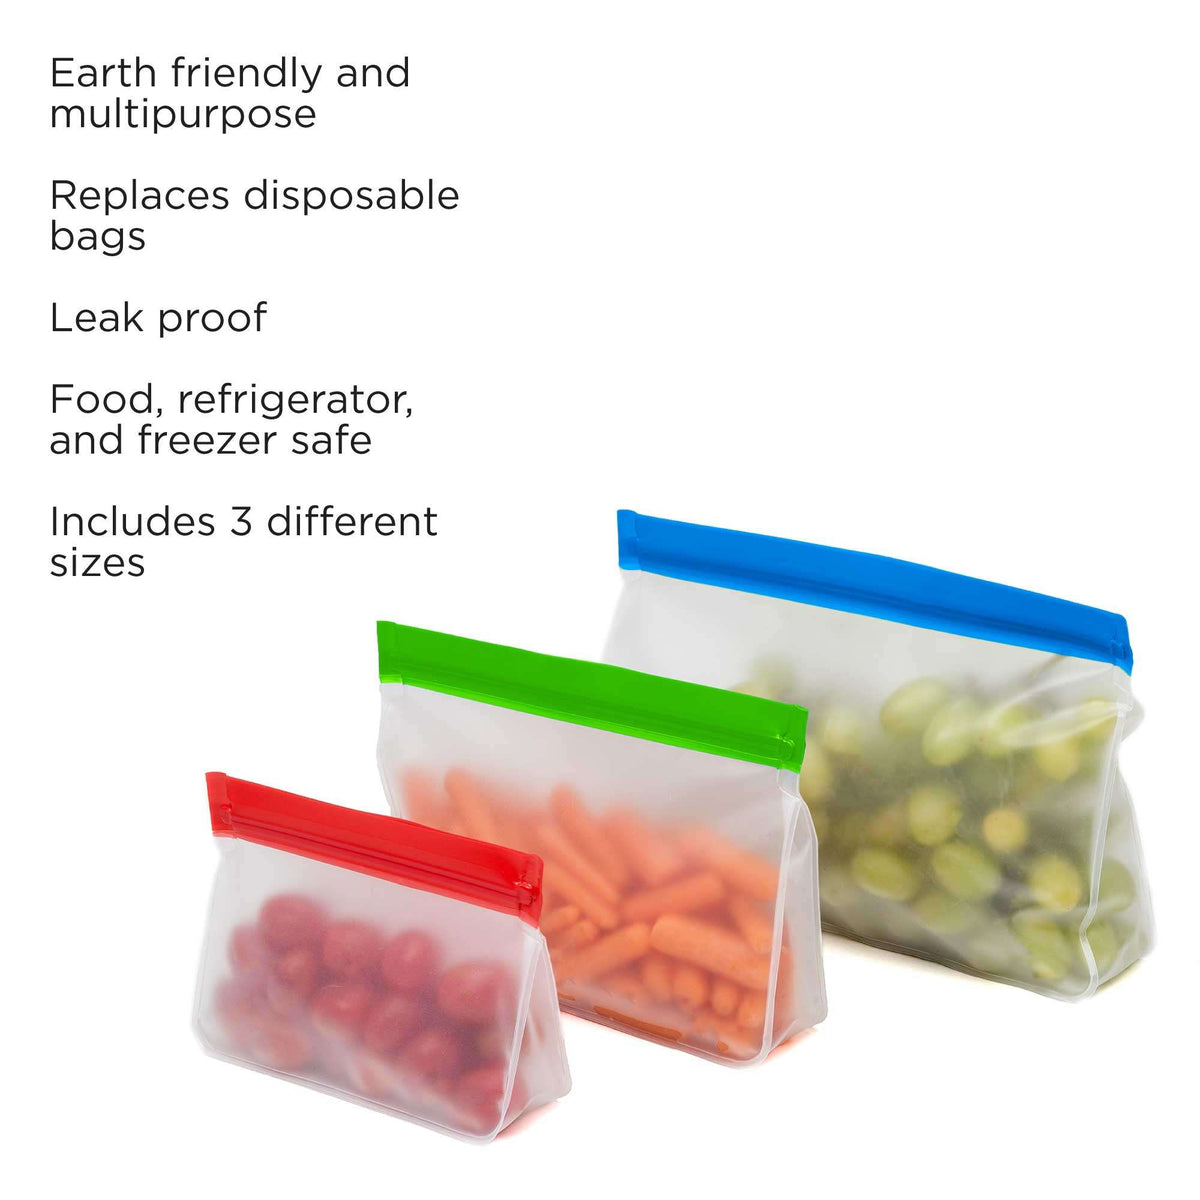 Reusable Storage Bags 6-Pack - Ecoigy